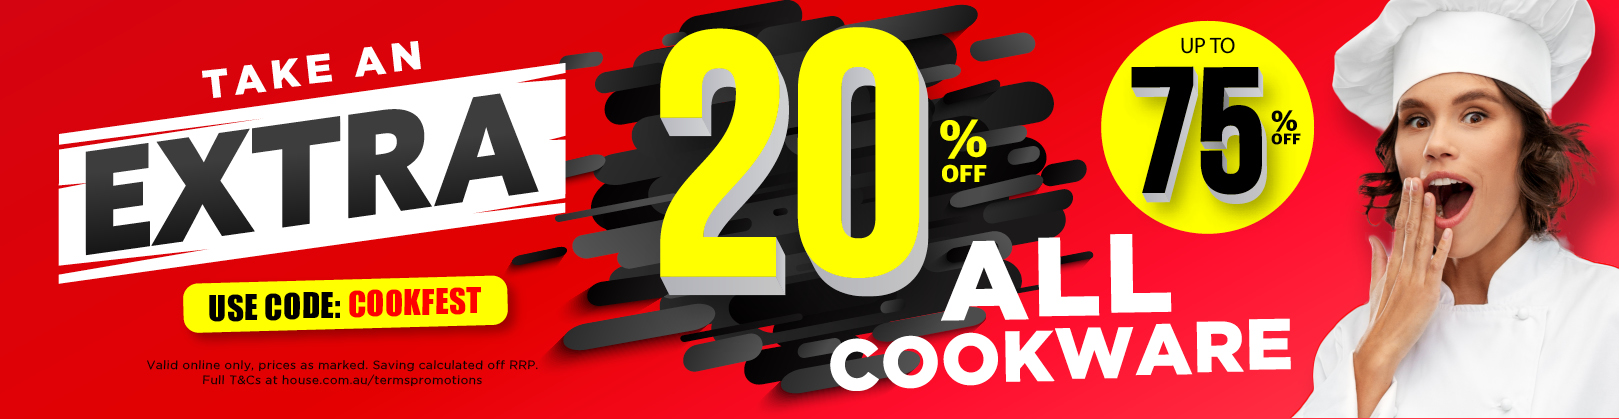 House up to 75% OFF + extra 20% OFF on all cookware with coupon. Save on Baccarat, Kambrook & more